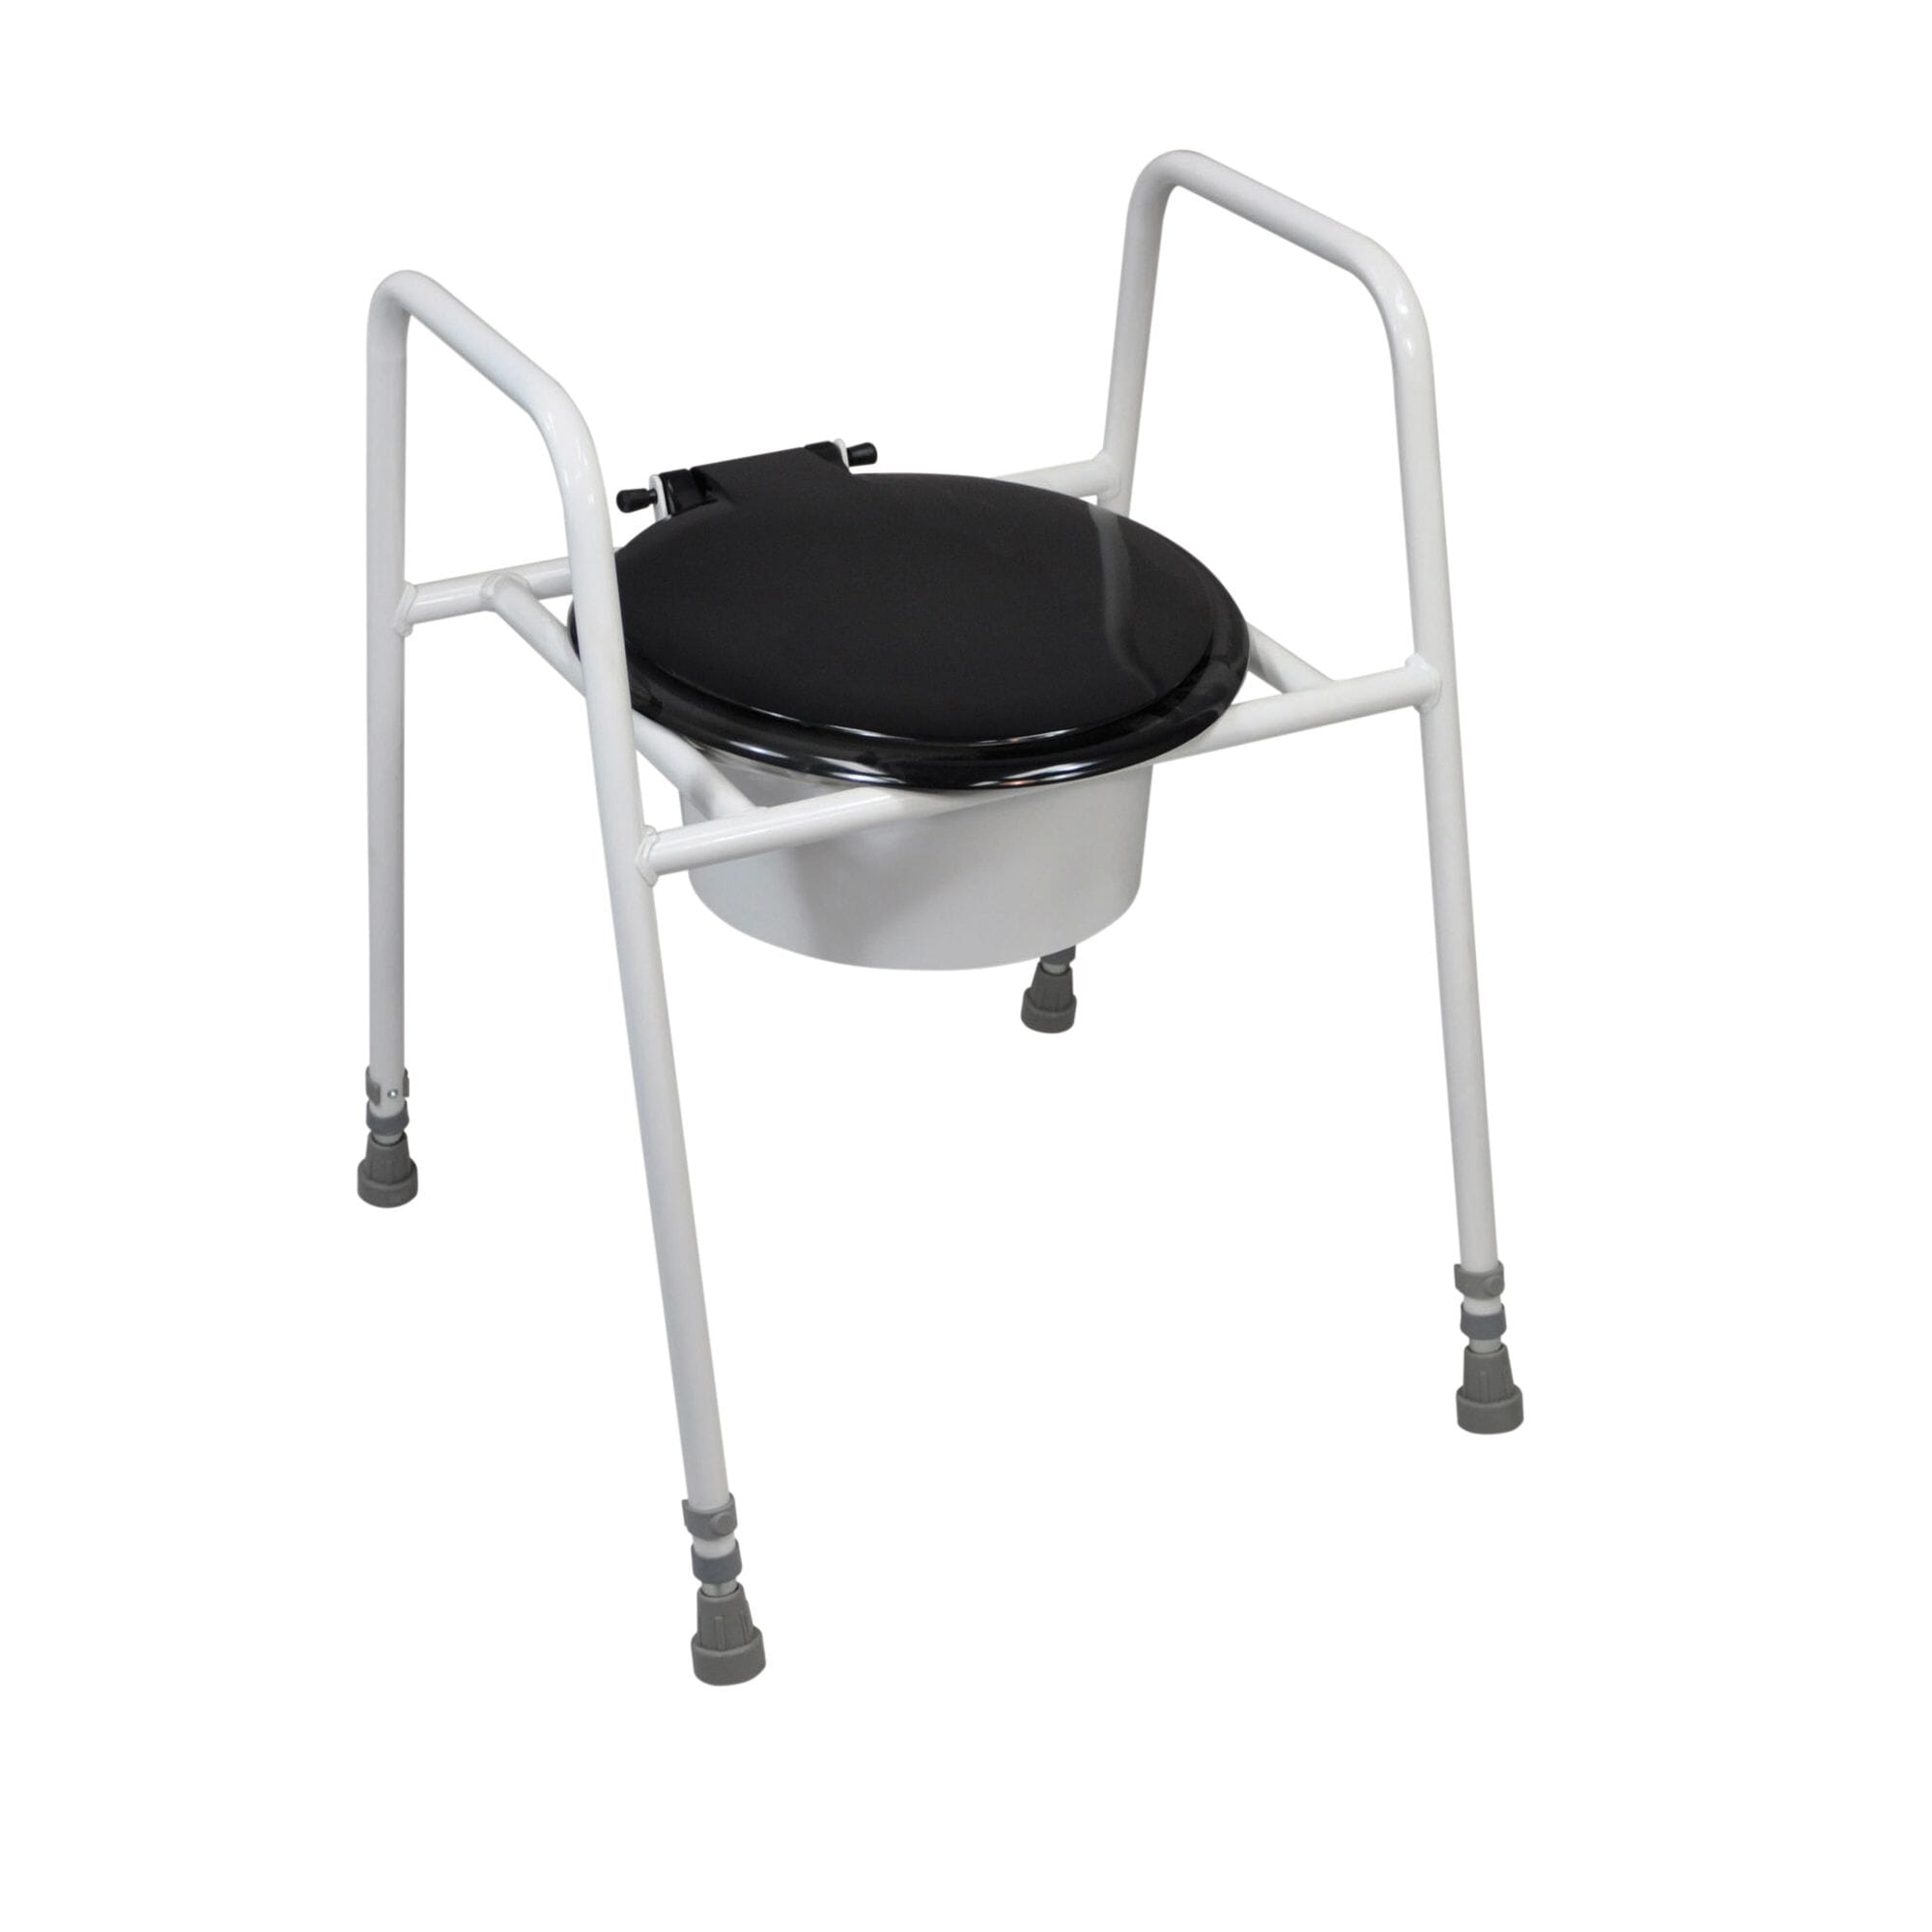 View Solo Skandia Raised Toilet Frame with Seat and Lid information